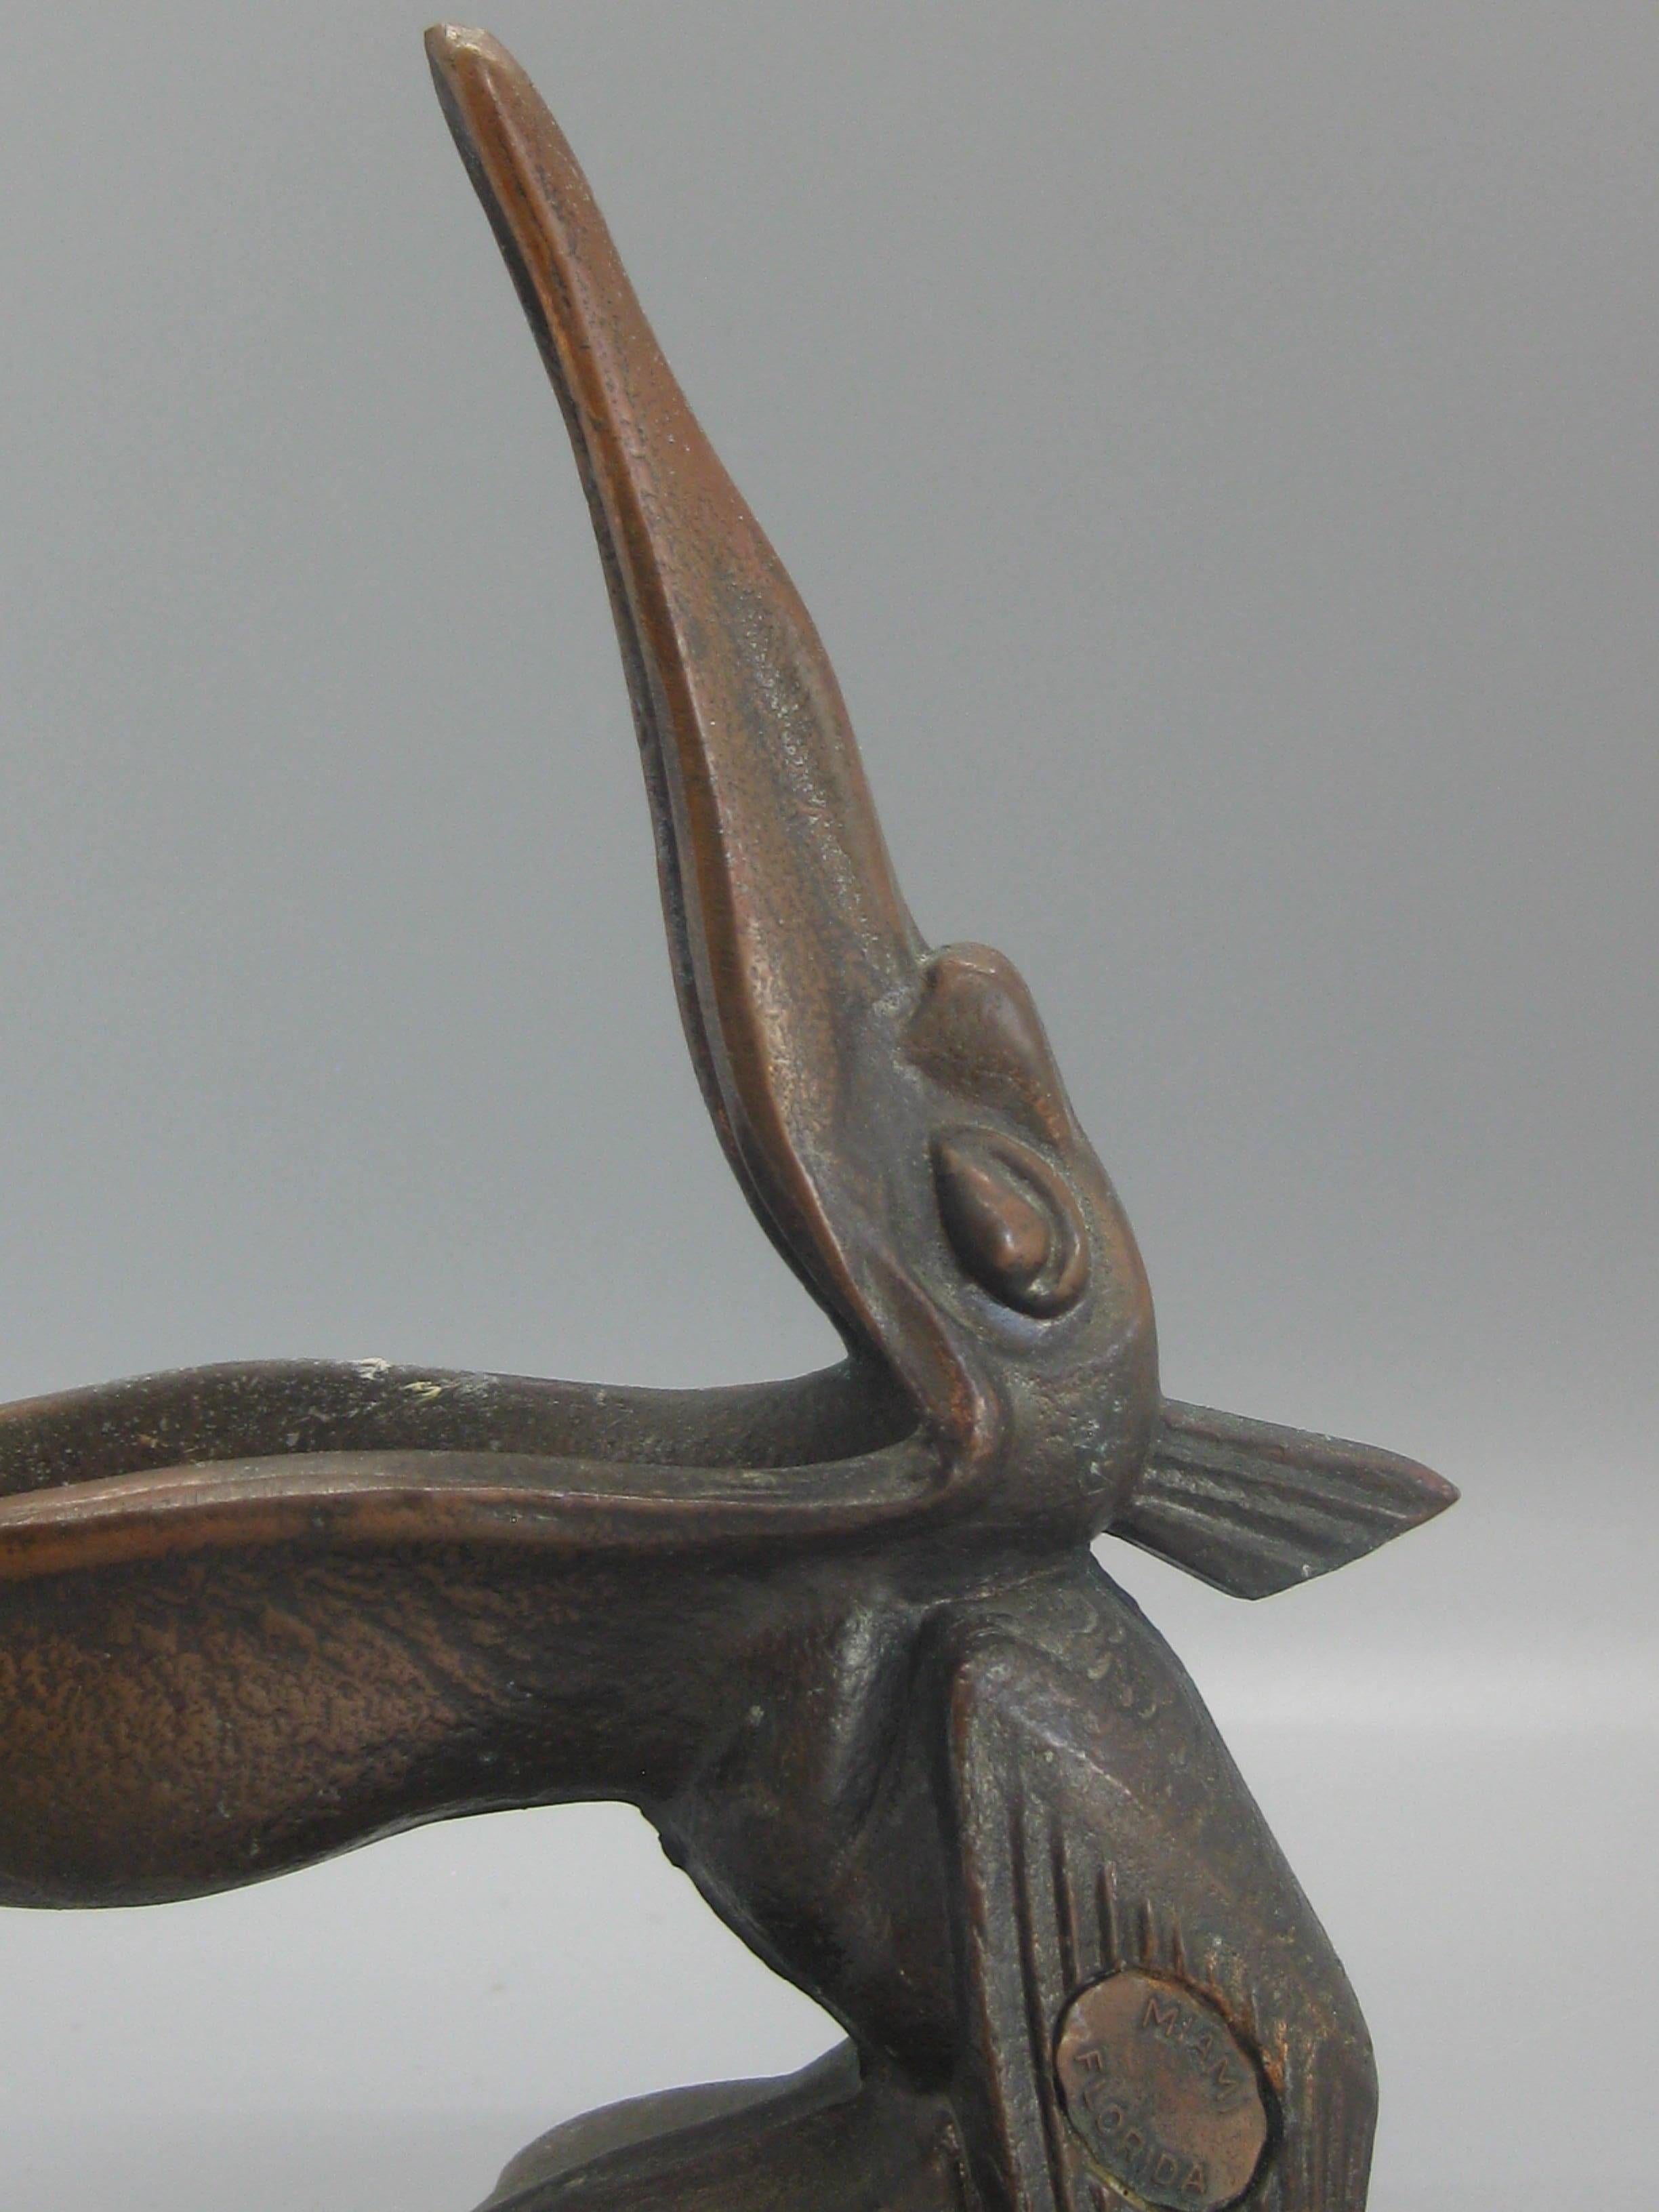 Beautiful antique Art Deco spelter metal with a bronze finish pelican bird figural cigar ashtray dating from the 1930s. The ashtray was a souvenir from Miami, Florida and is marked on the side. No maker marks but might be made by Jennings Bros. or